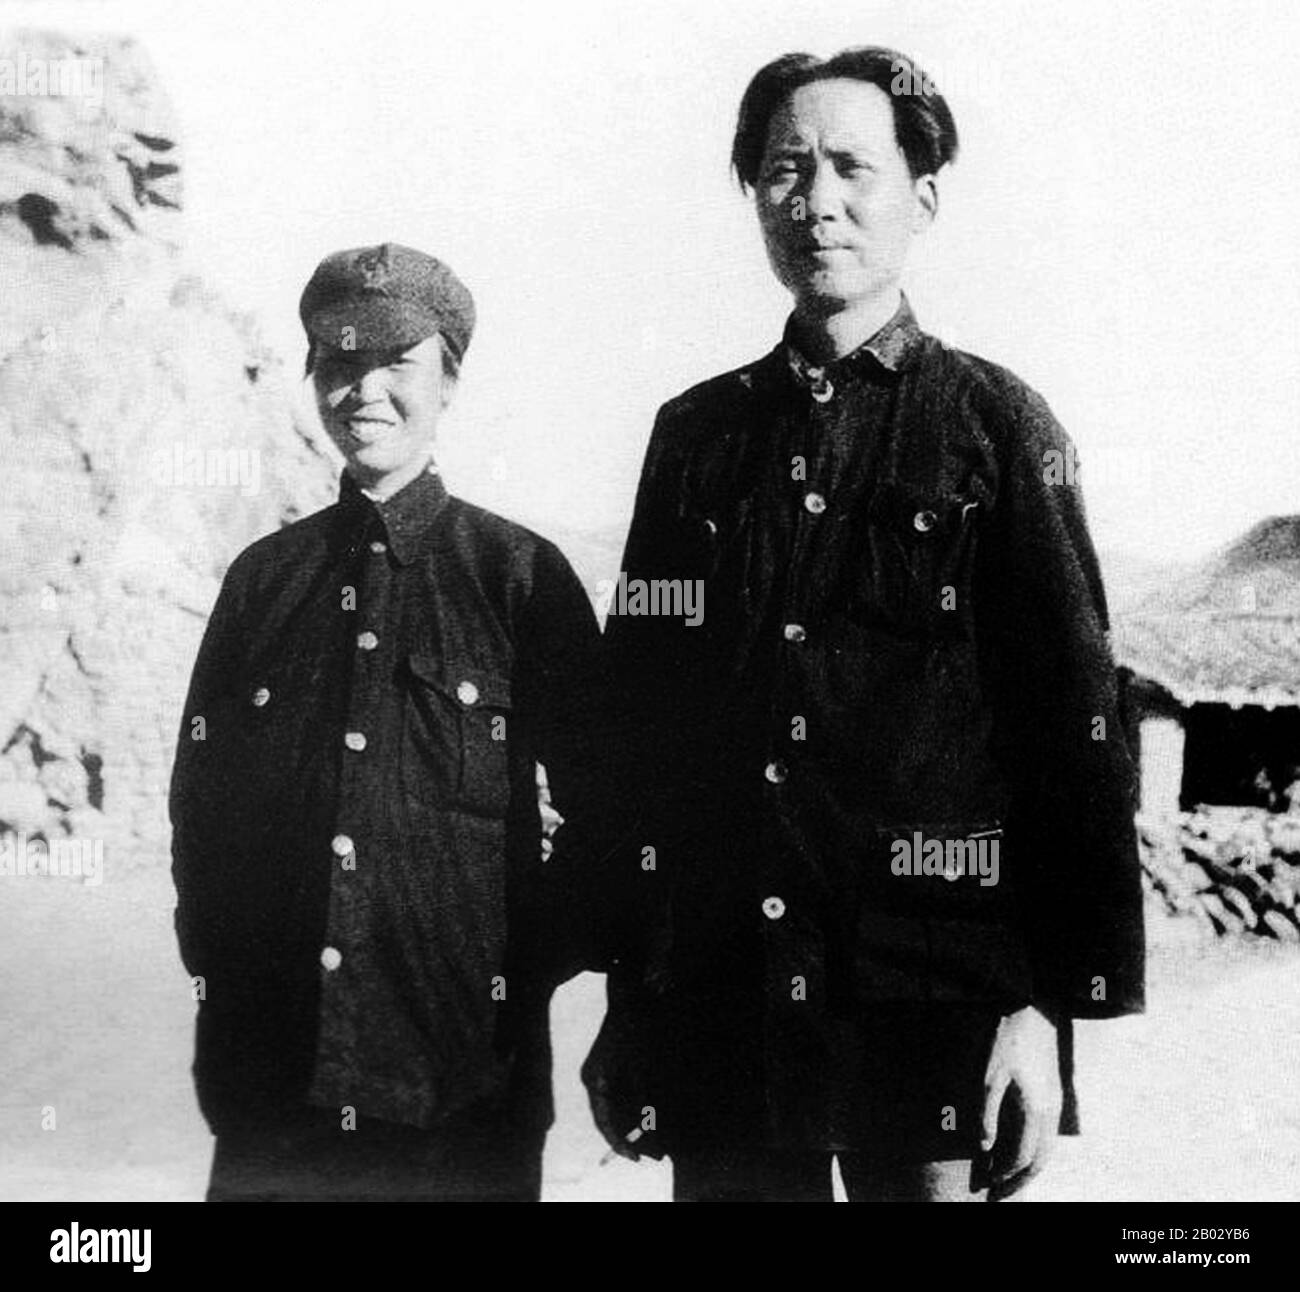 He Zizhen or Ho Tzu-chen (September 1909 – April 19, 1984) was married to Mao from May 1928 to 1939. She was the mother of Mao Anhong, Li Min, and four other children.  The Jinggang Mountains are known as the birthplace of the Chinese Red Army, predecessor of the People's Liberation Army and the 'cradle of the Chinese revolution'. After the Kuomintang (KMT) turned against the Communist Party during the April 12 Incident, the Communists either went underground or fled to the countryside. Following the unsuccessful Autumn Harvest Uprising in Changsha, Mao Zedong led his 1,000 remaining men here, Stock Photo